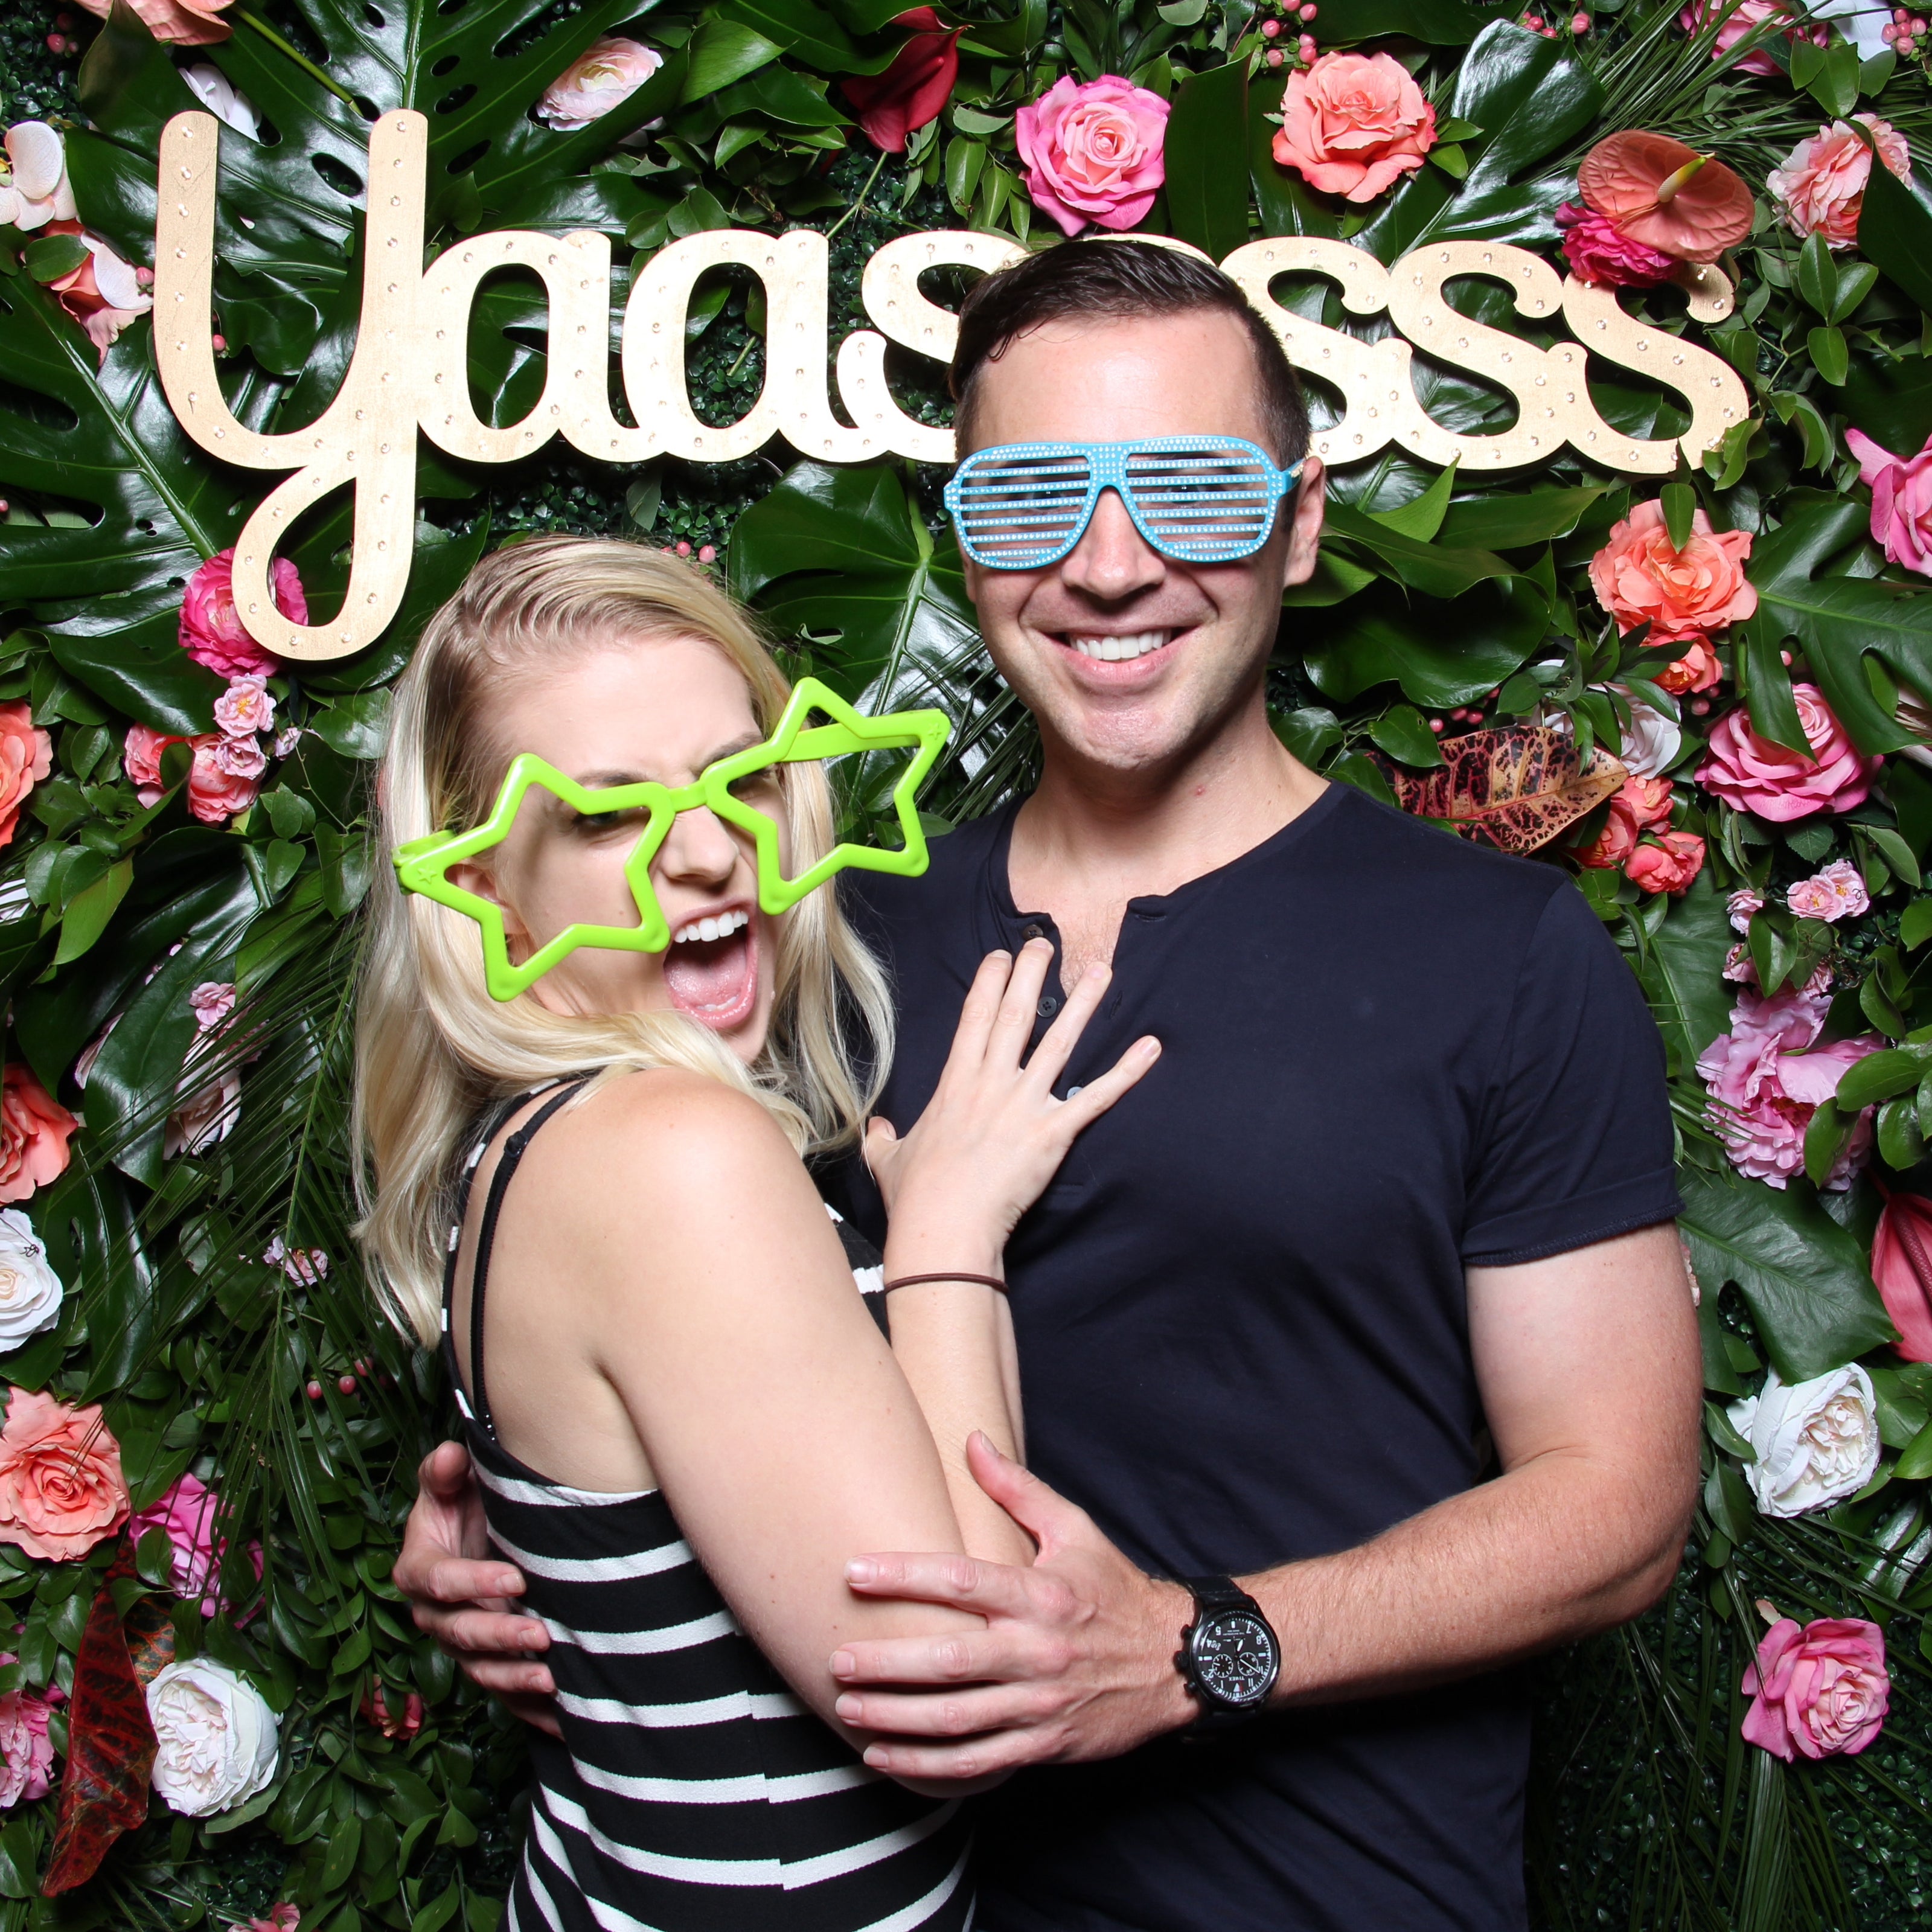 Guy and girl in a photo booth wearing crazy glasses while posing in front of a flower backdrop with a gold "Yaasssss" sign